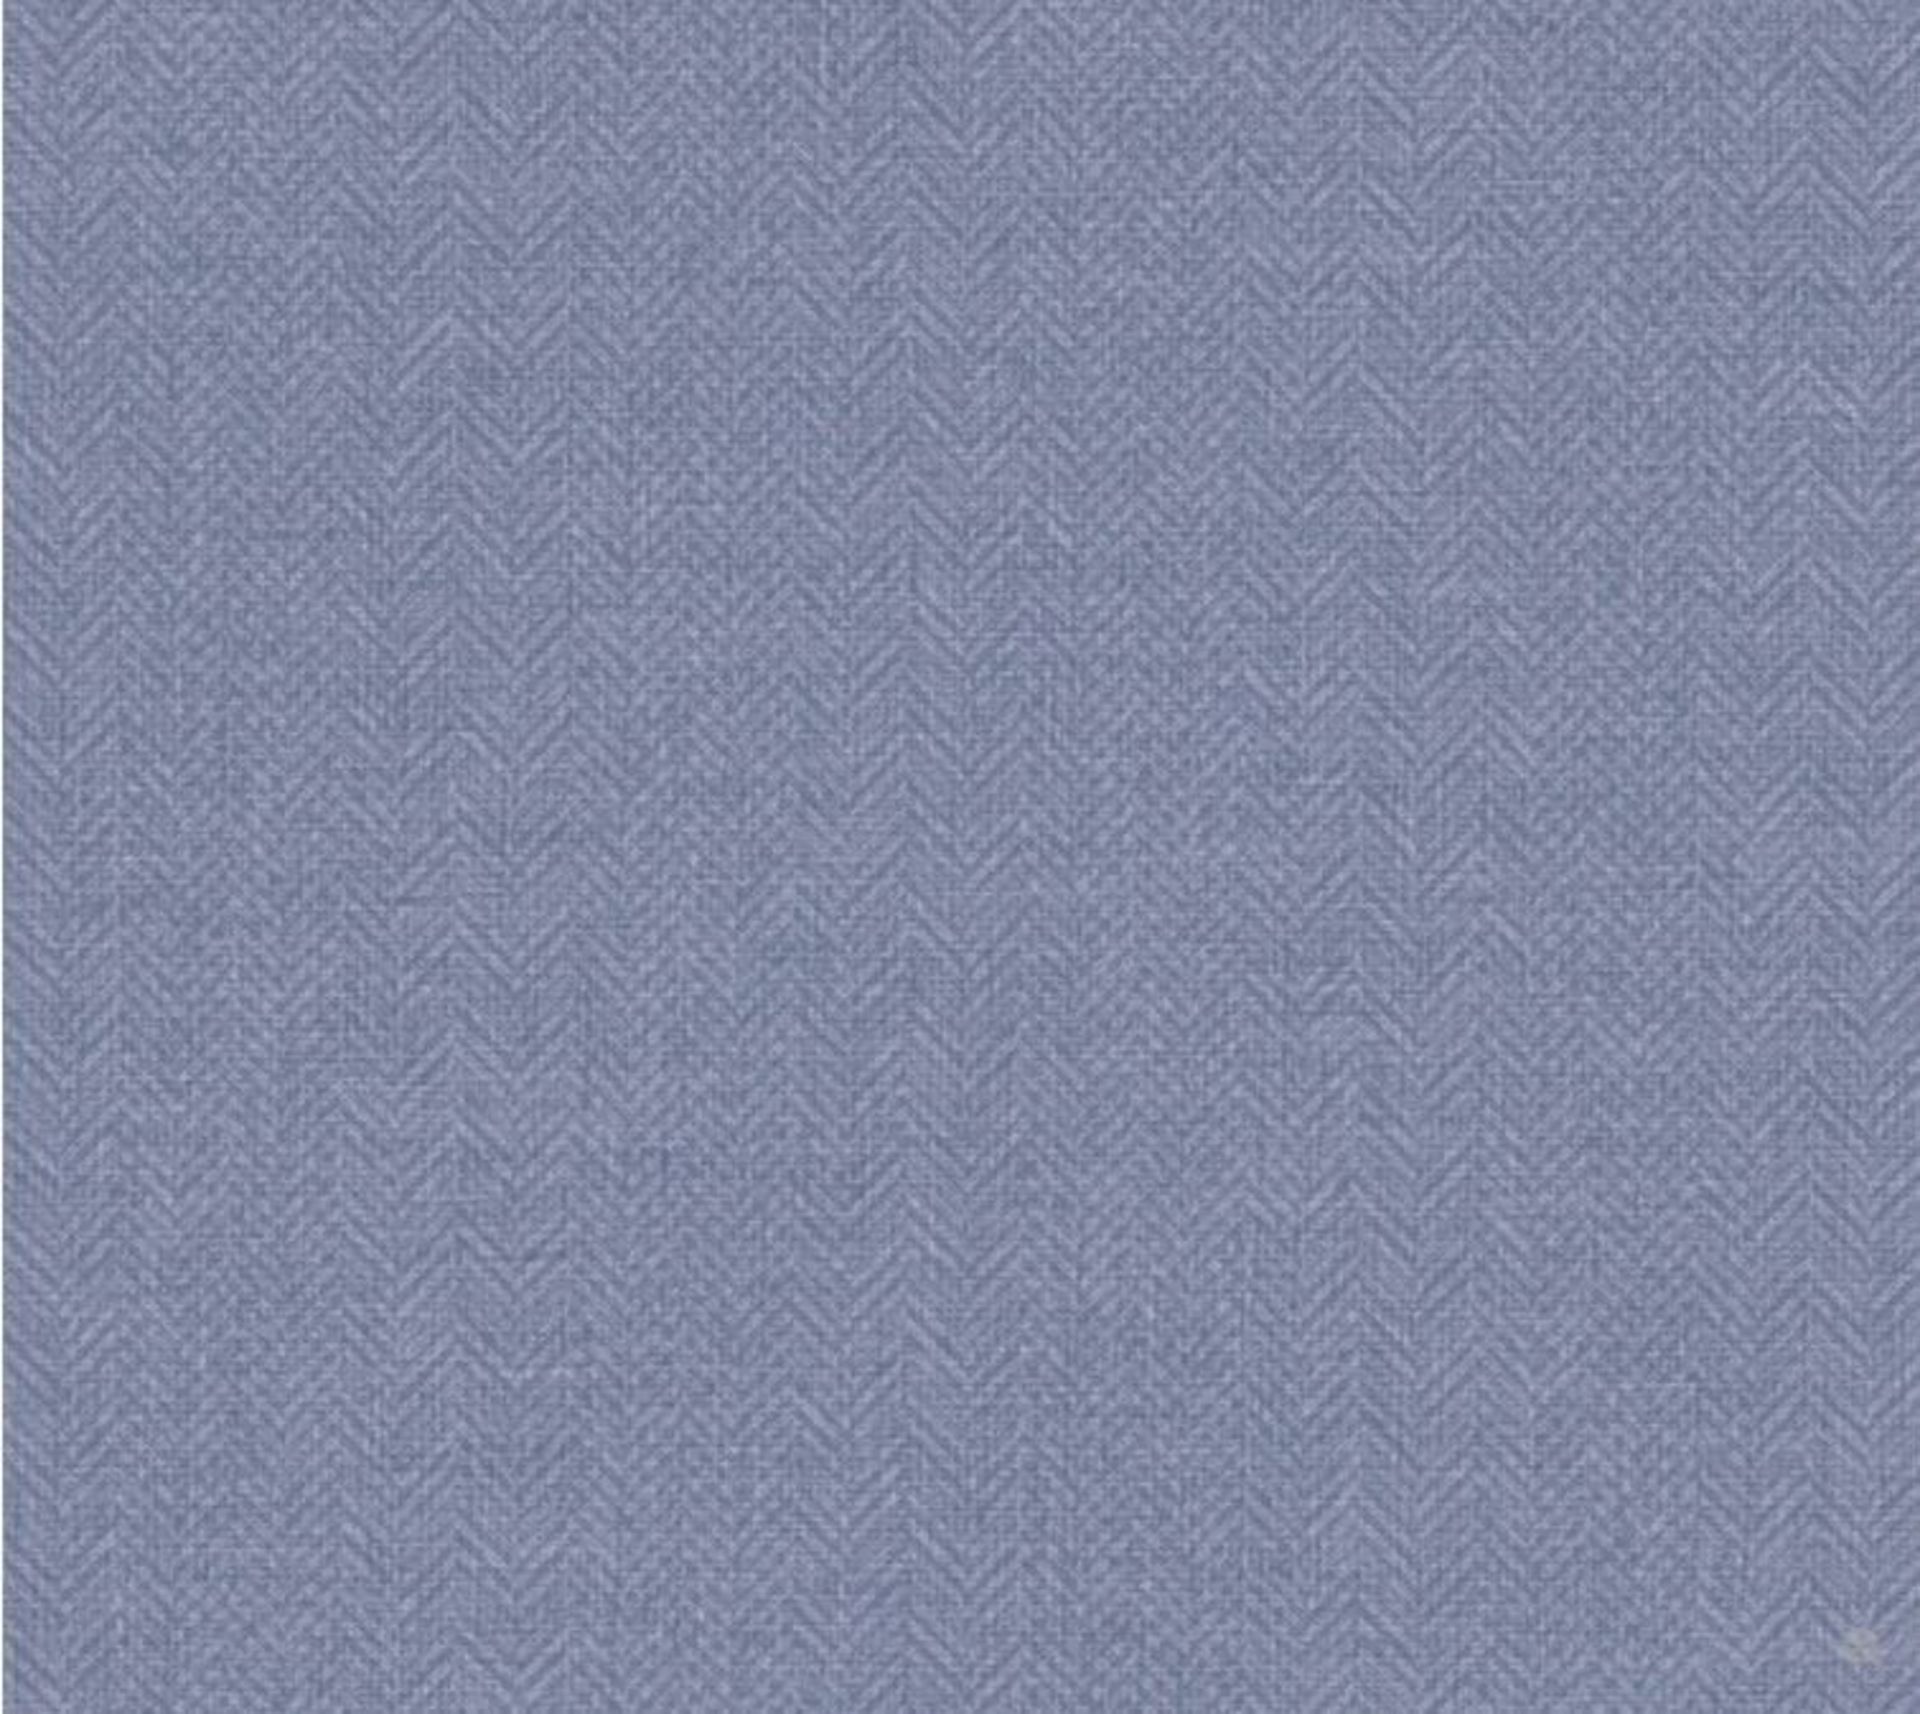 1 LOT TO CONTAIN 12 AS NEW ROLLS OF ARTHOUSE HERRINGBONE TEXTURE WALLPAPER IN BLUE - 942407 / RRP £